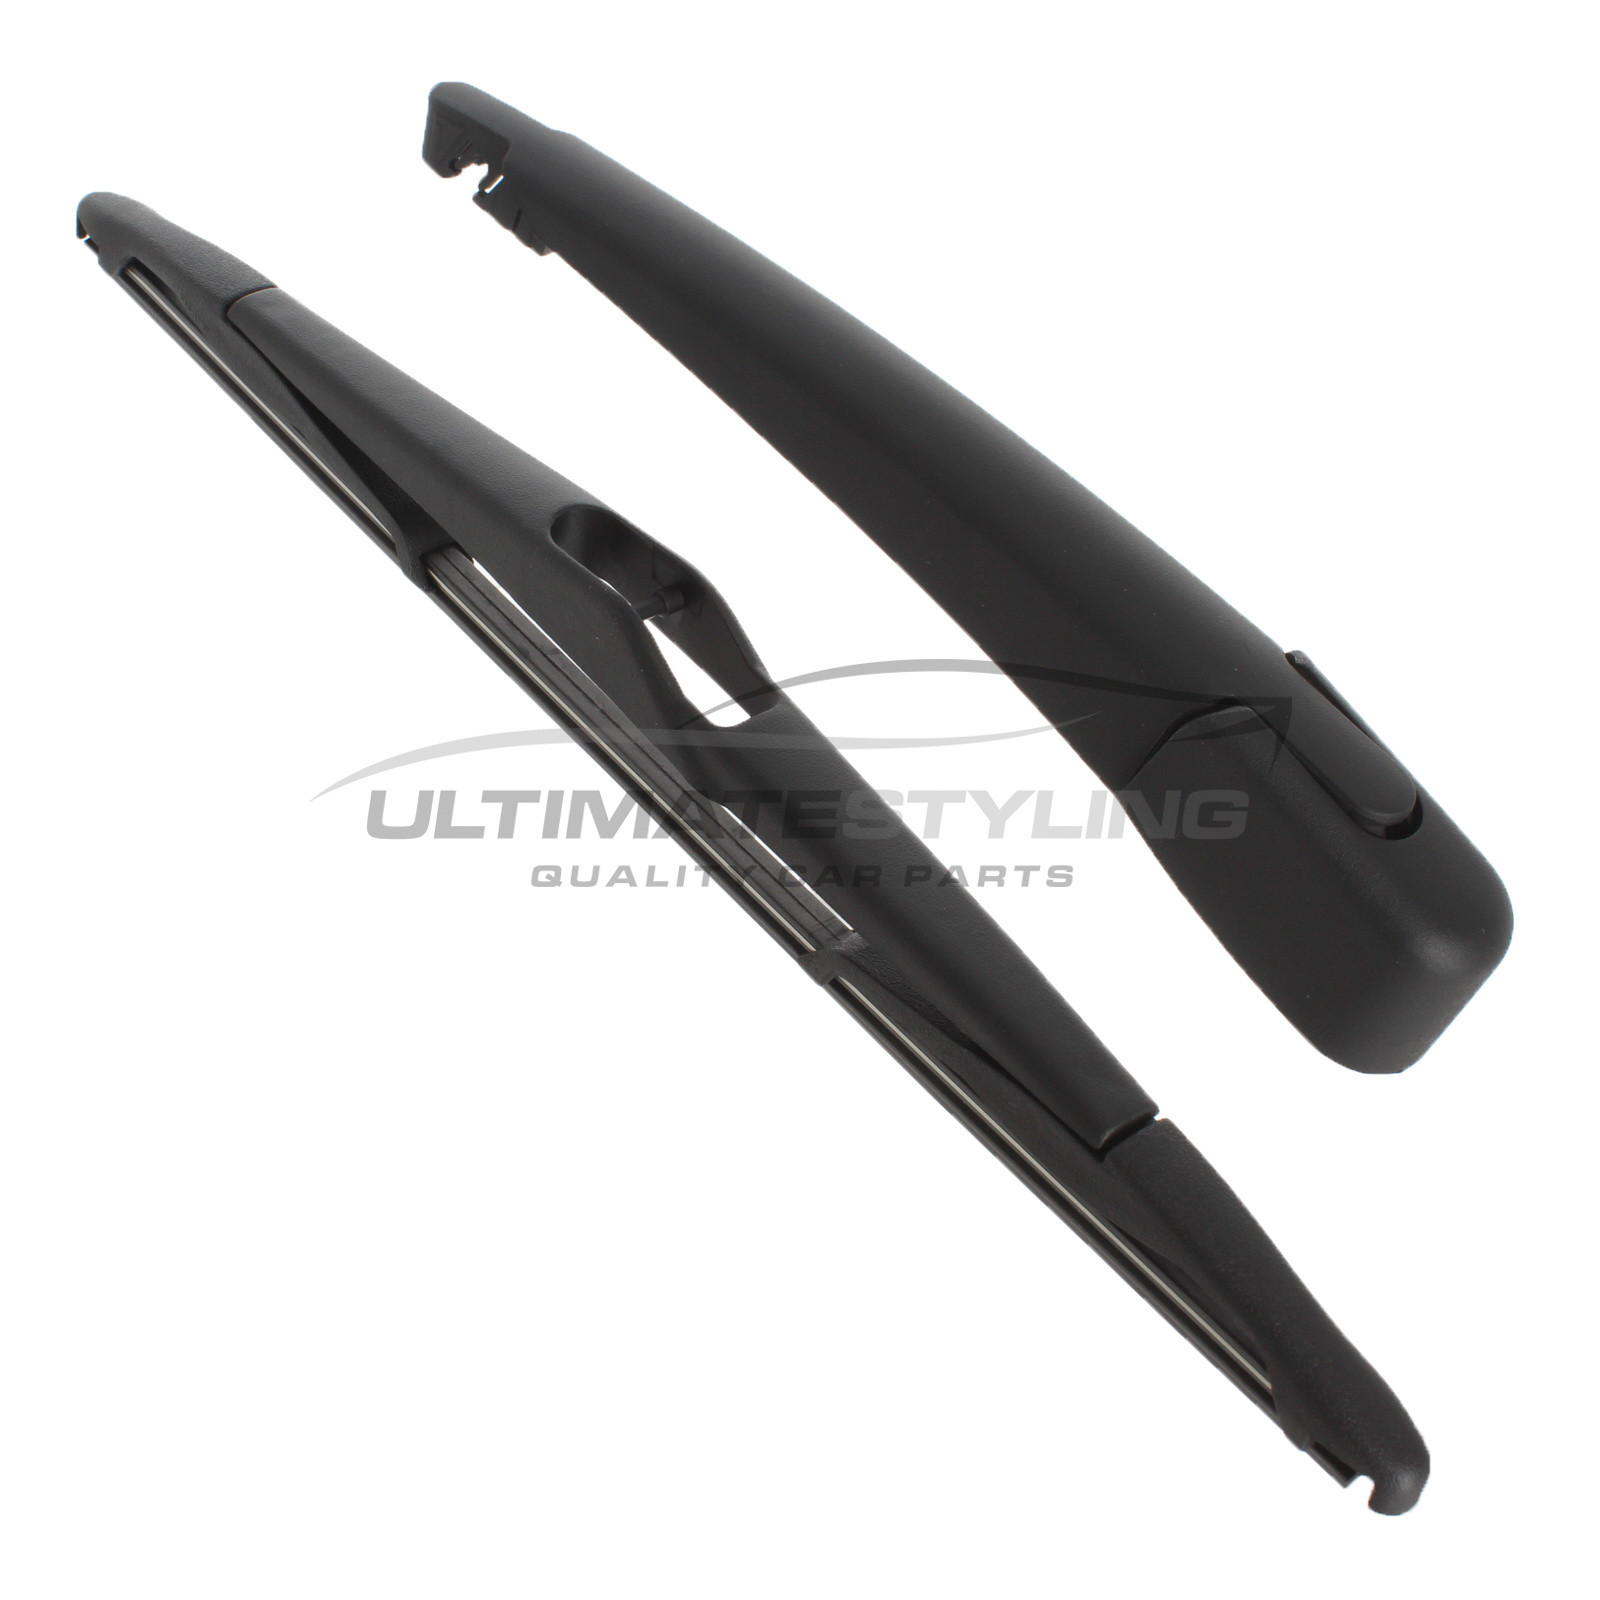 Rear Wiper Arm & Blade Set for Ford Focus